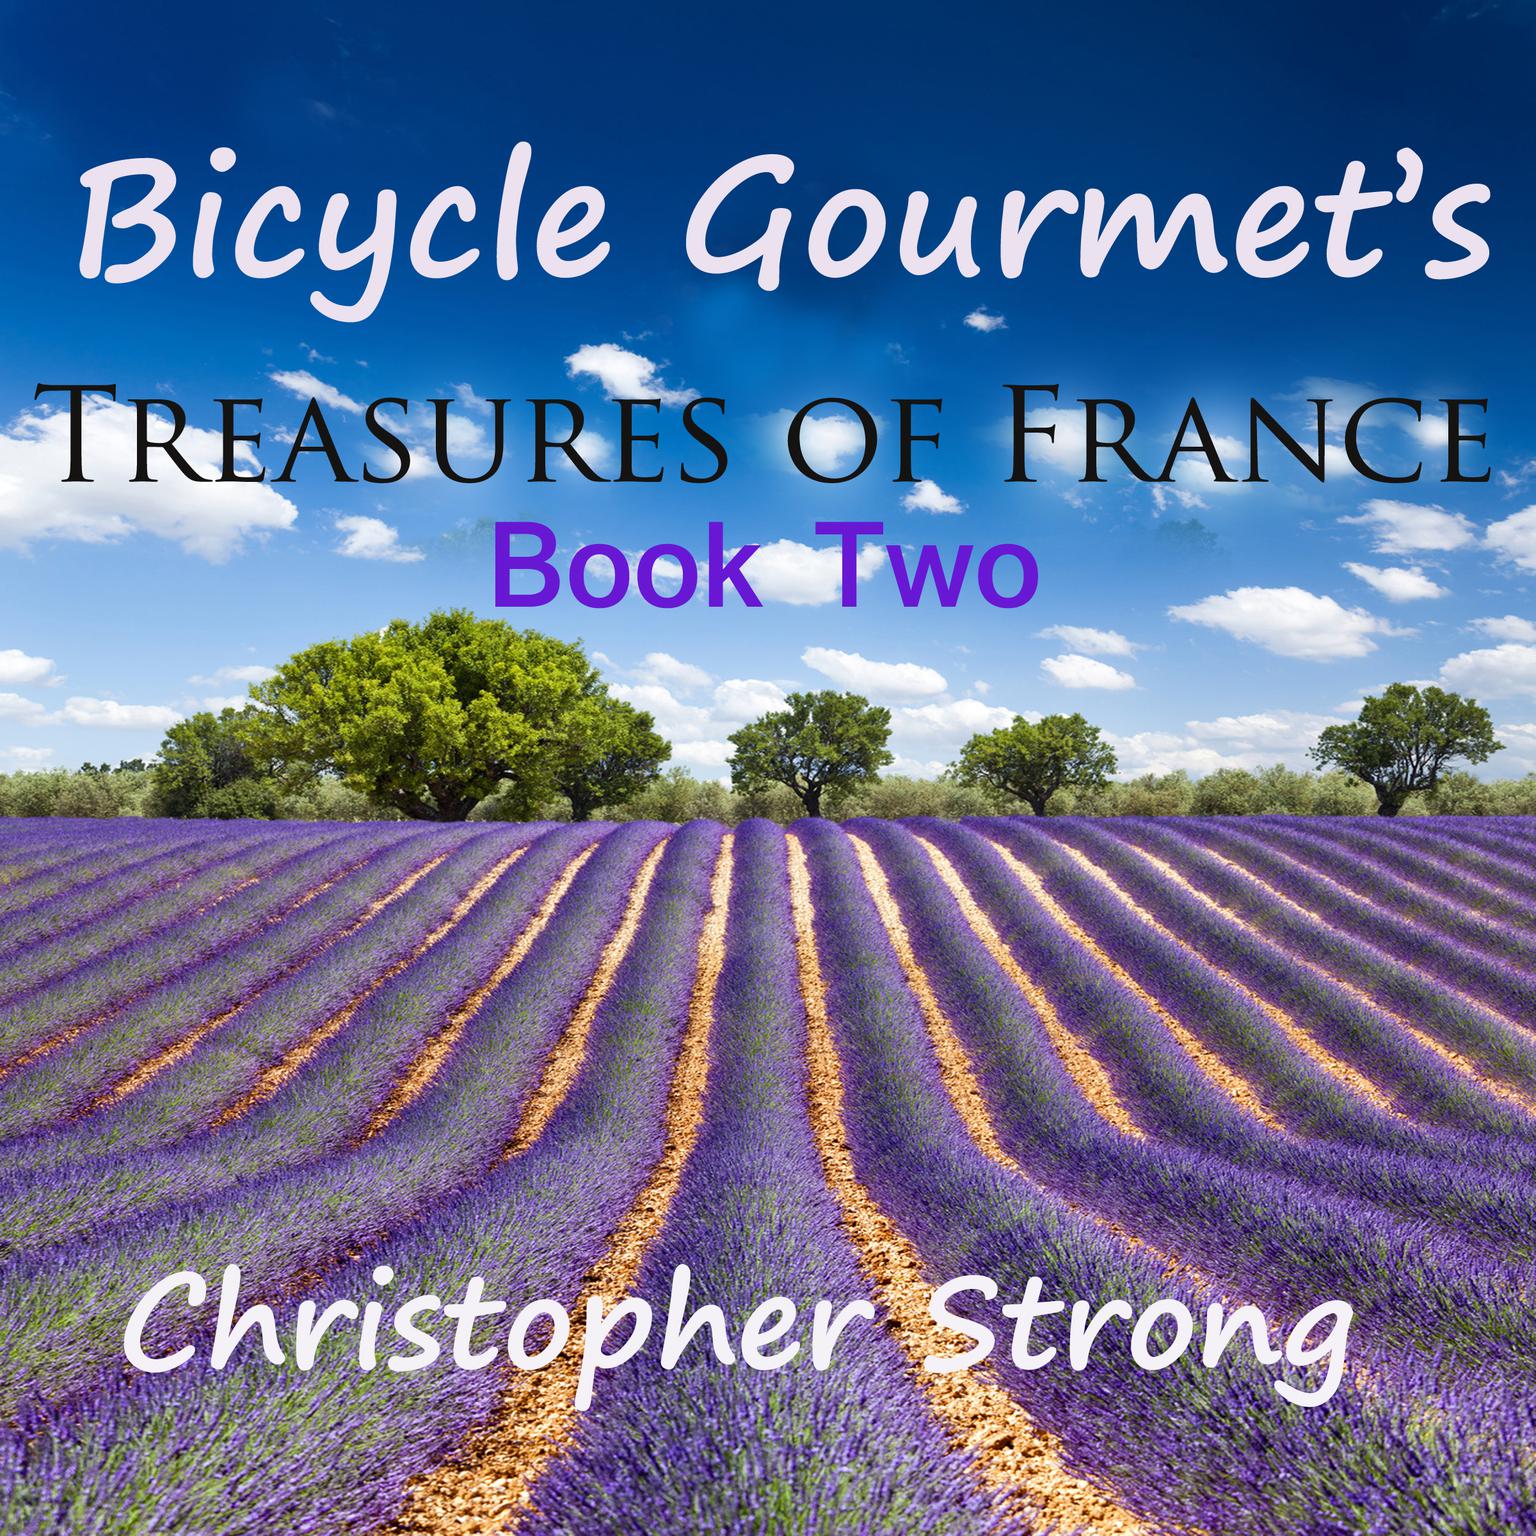 Bicycle Gourmets Treasures of France - Book Two Audiobook, by Christopher Strong